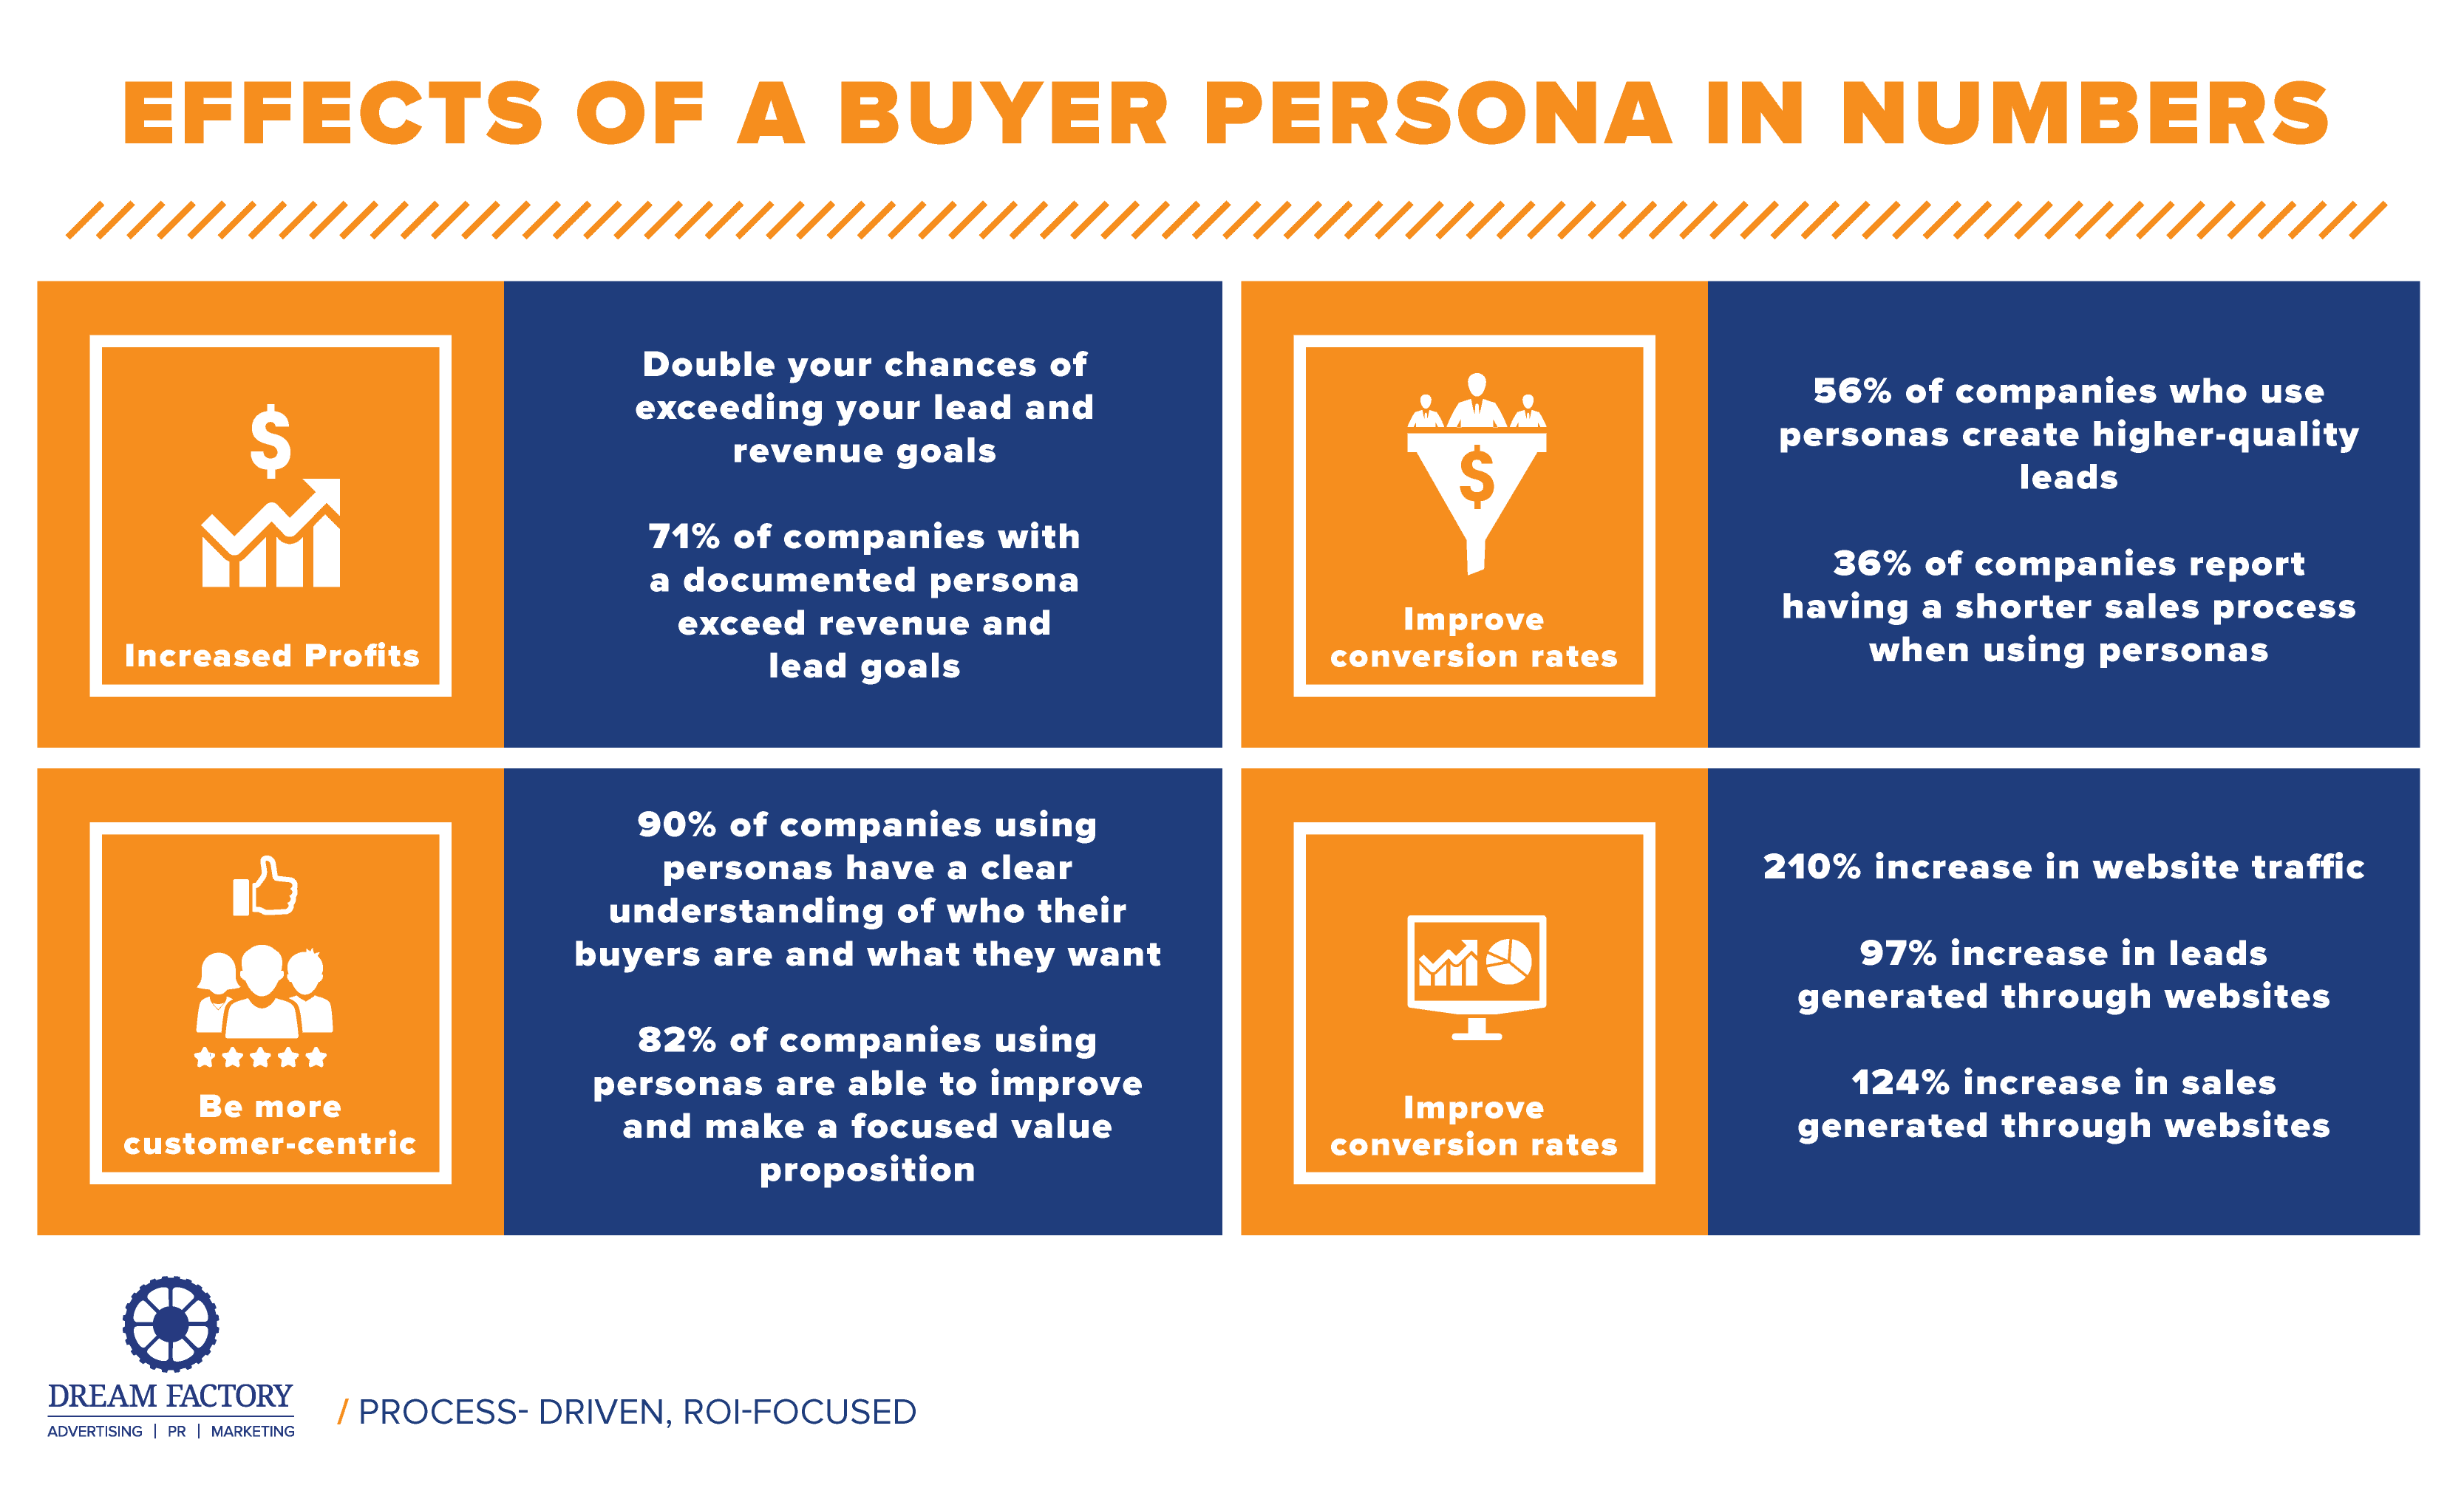 B2B Buyer Personas Infographic about the effects of a buyer person in the numbers